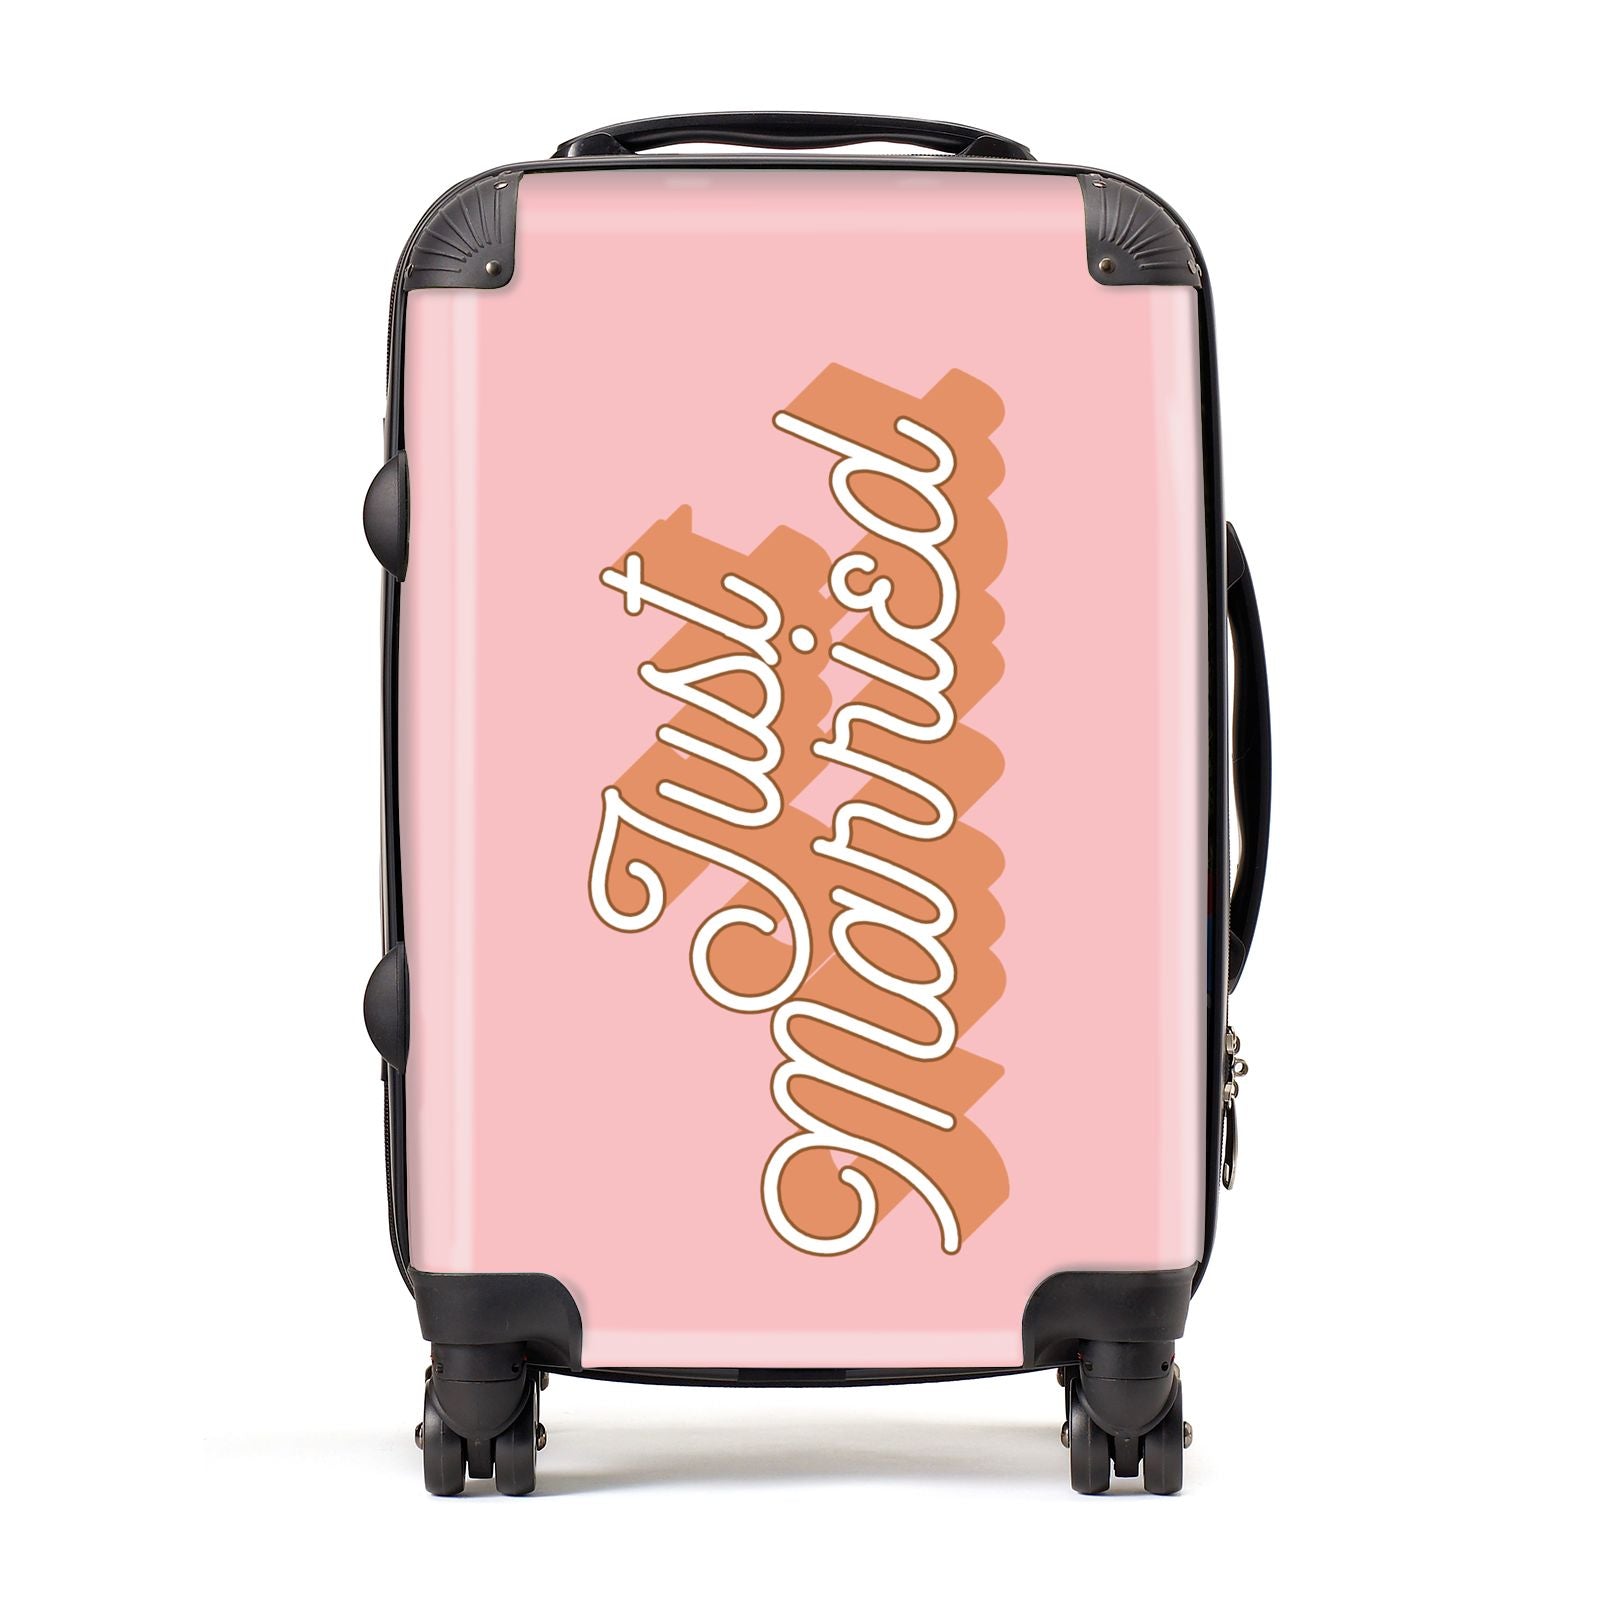 Just Married Pink Suitcase